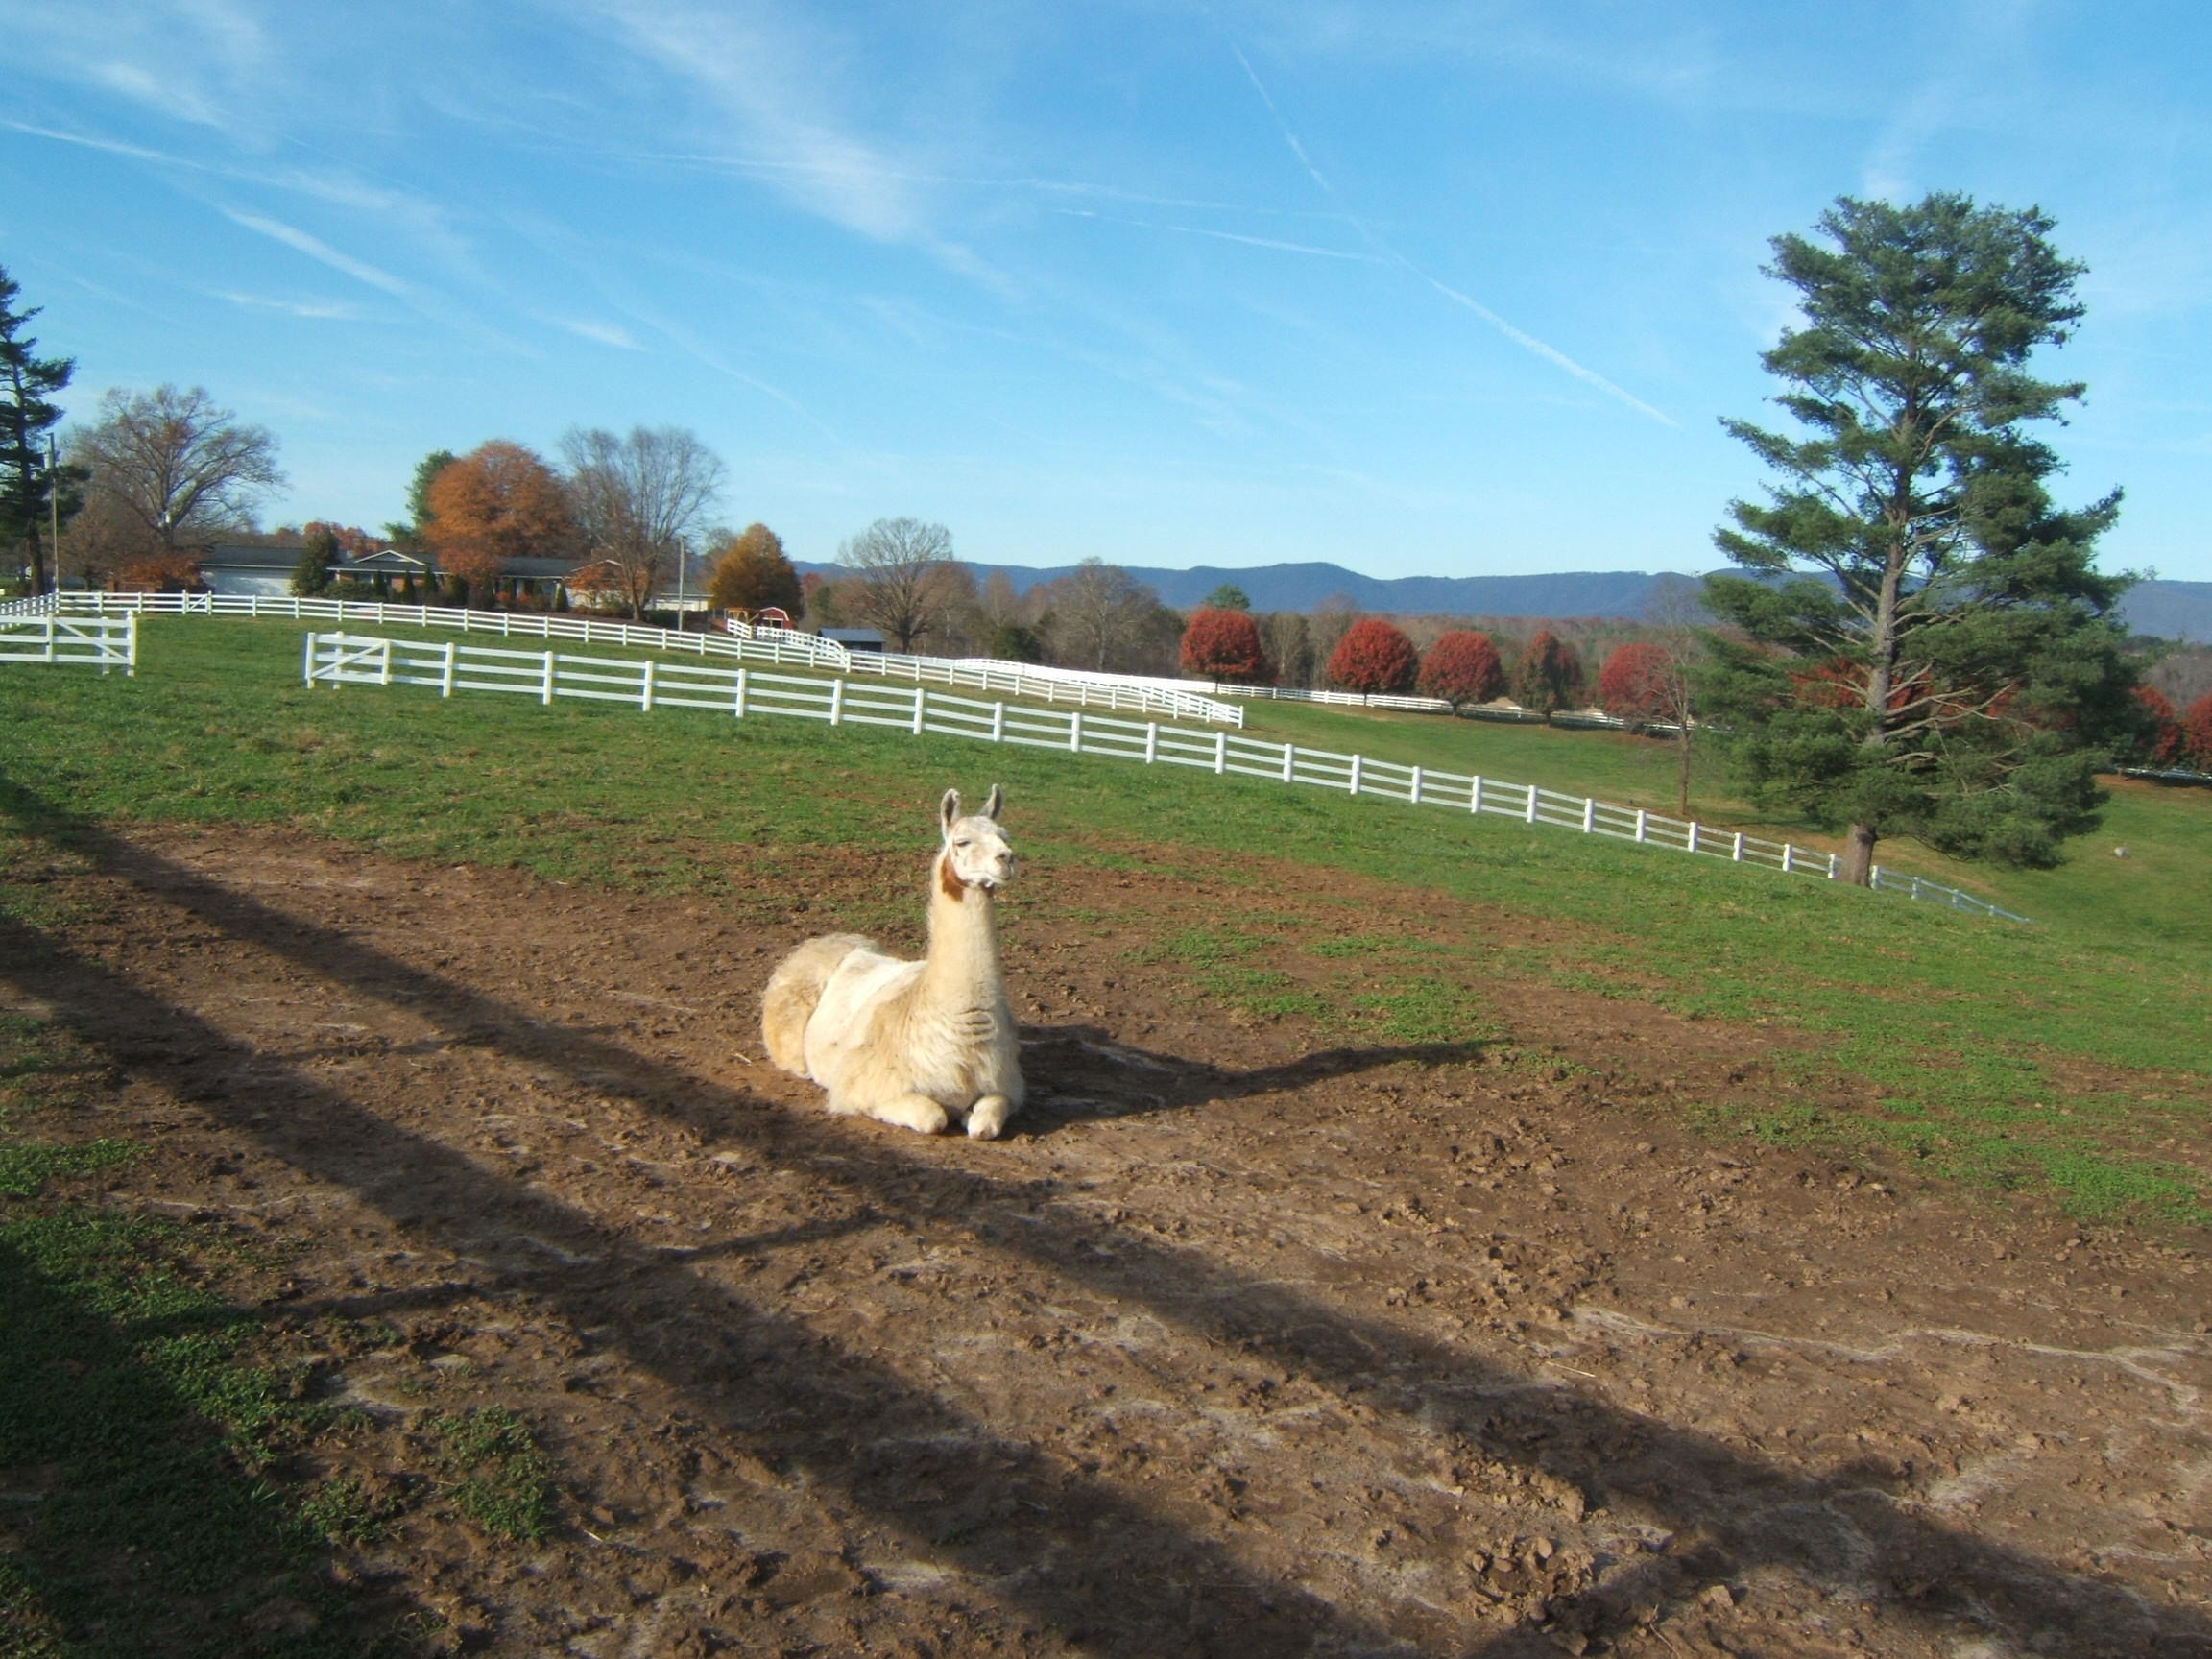   LLAMA IN THOUGHT 